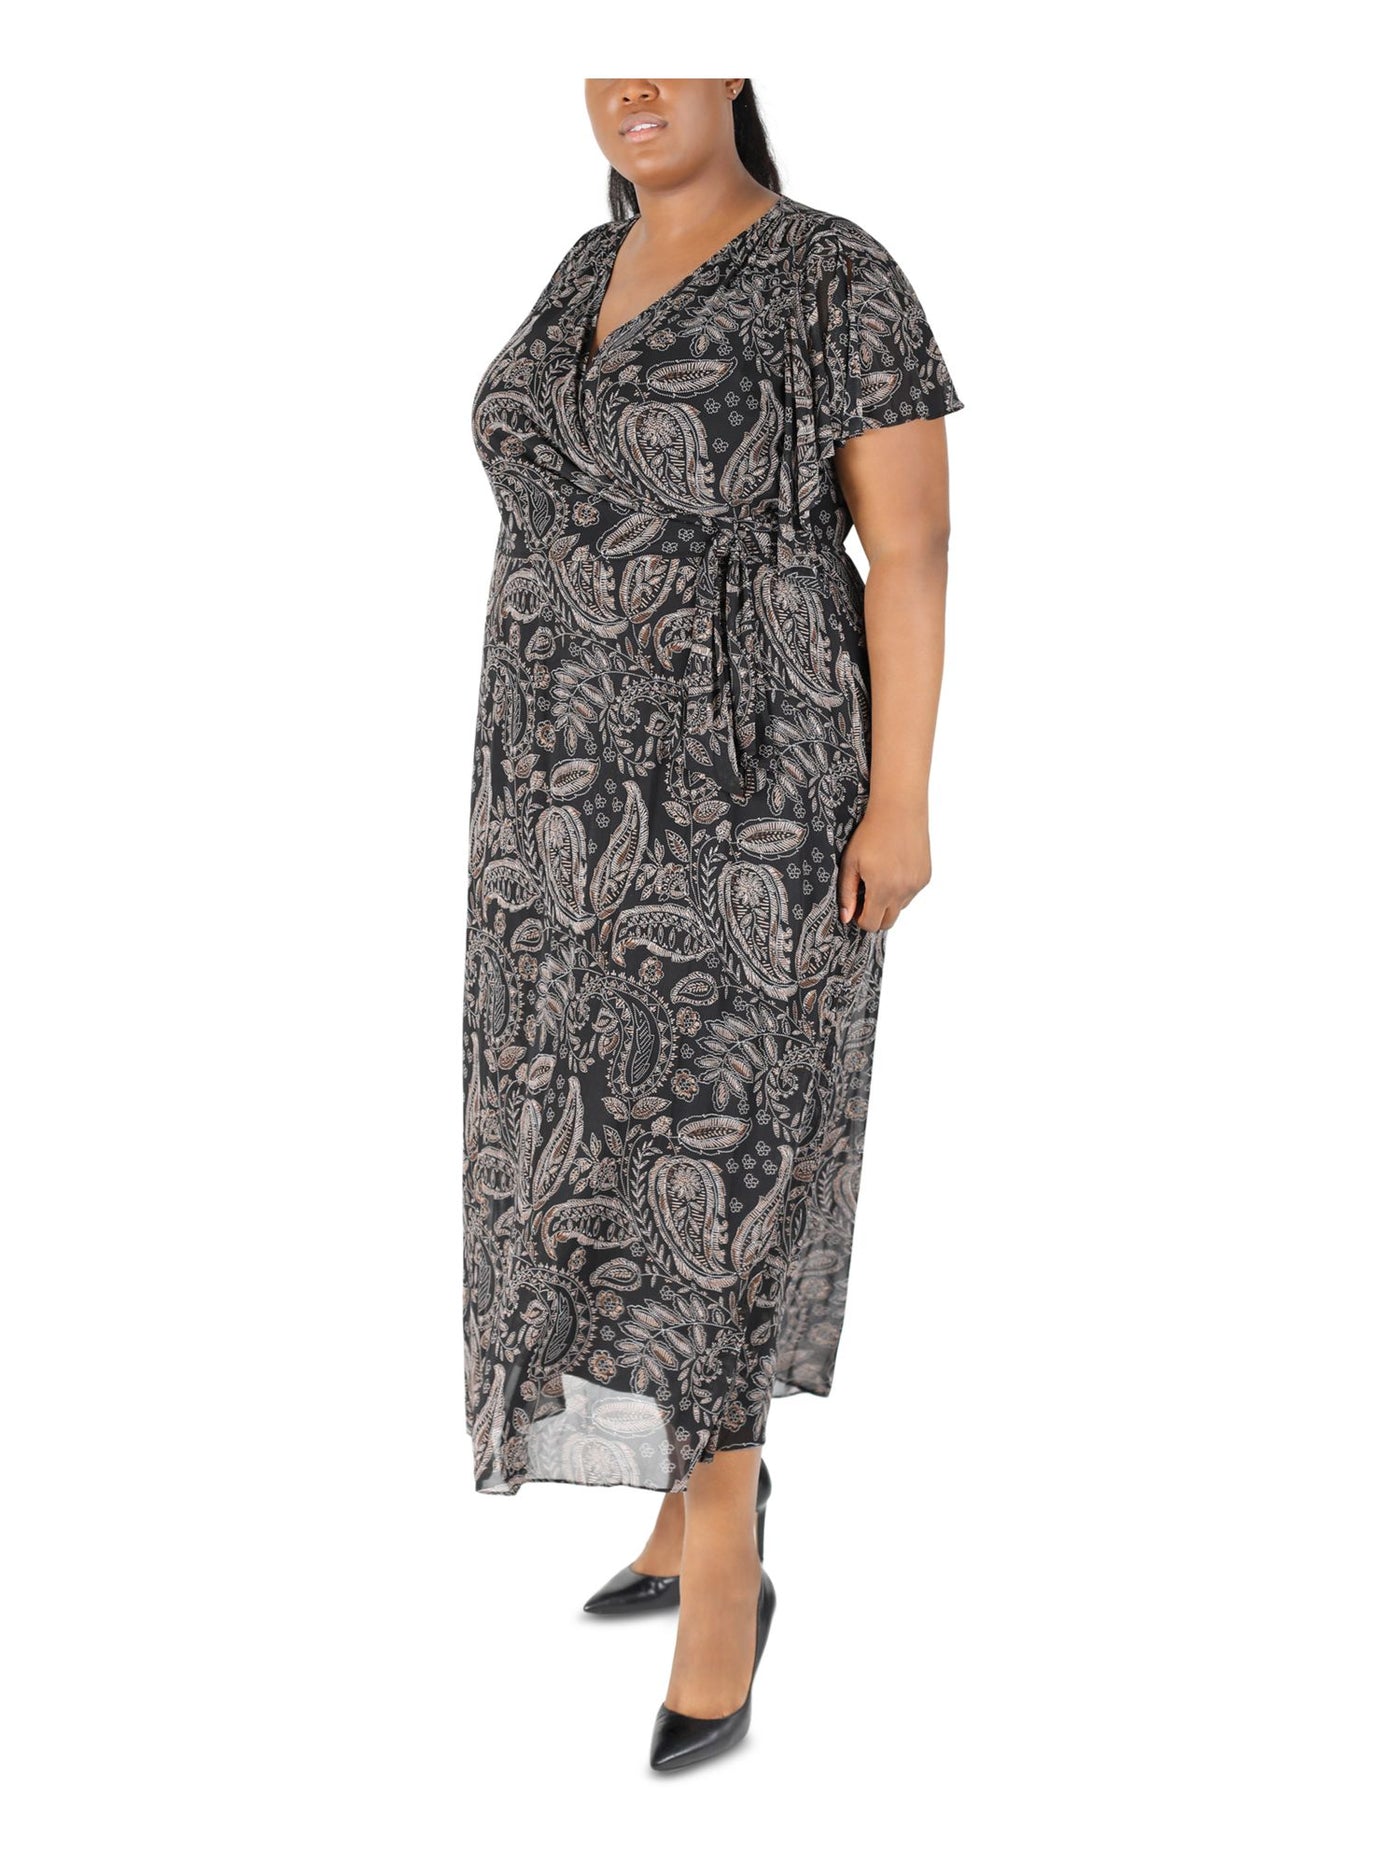 SIGNATURE BY ROBBIE BEE Womens Black Tie Pullover Style Lined Printed Flutter Sleeve Surplice Neckline Maxi Wear To Work Shift Dress Plus 1X